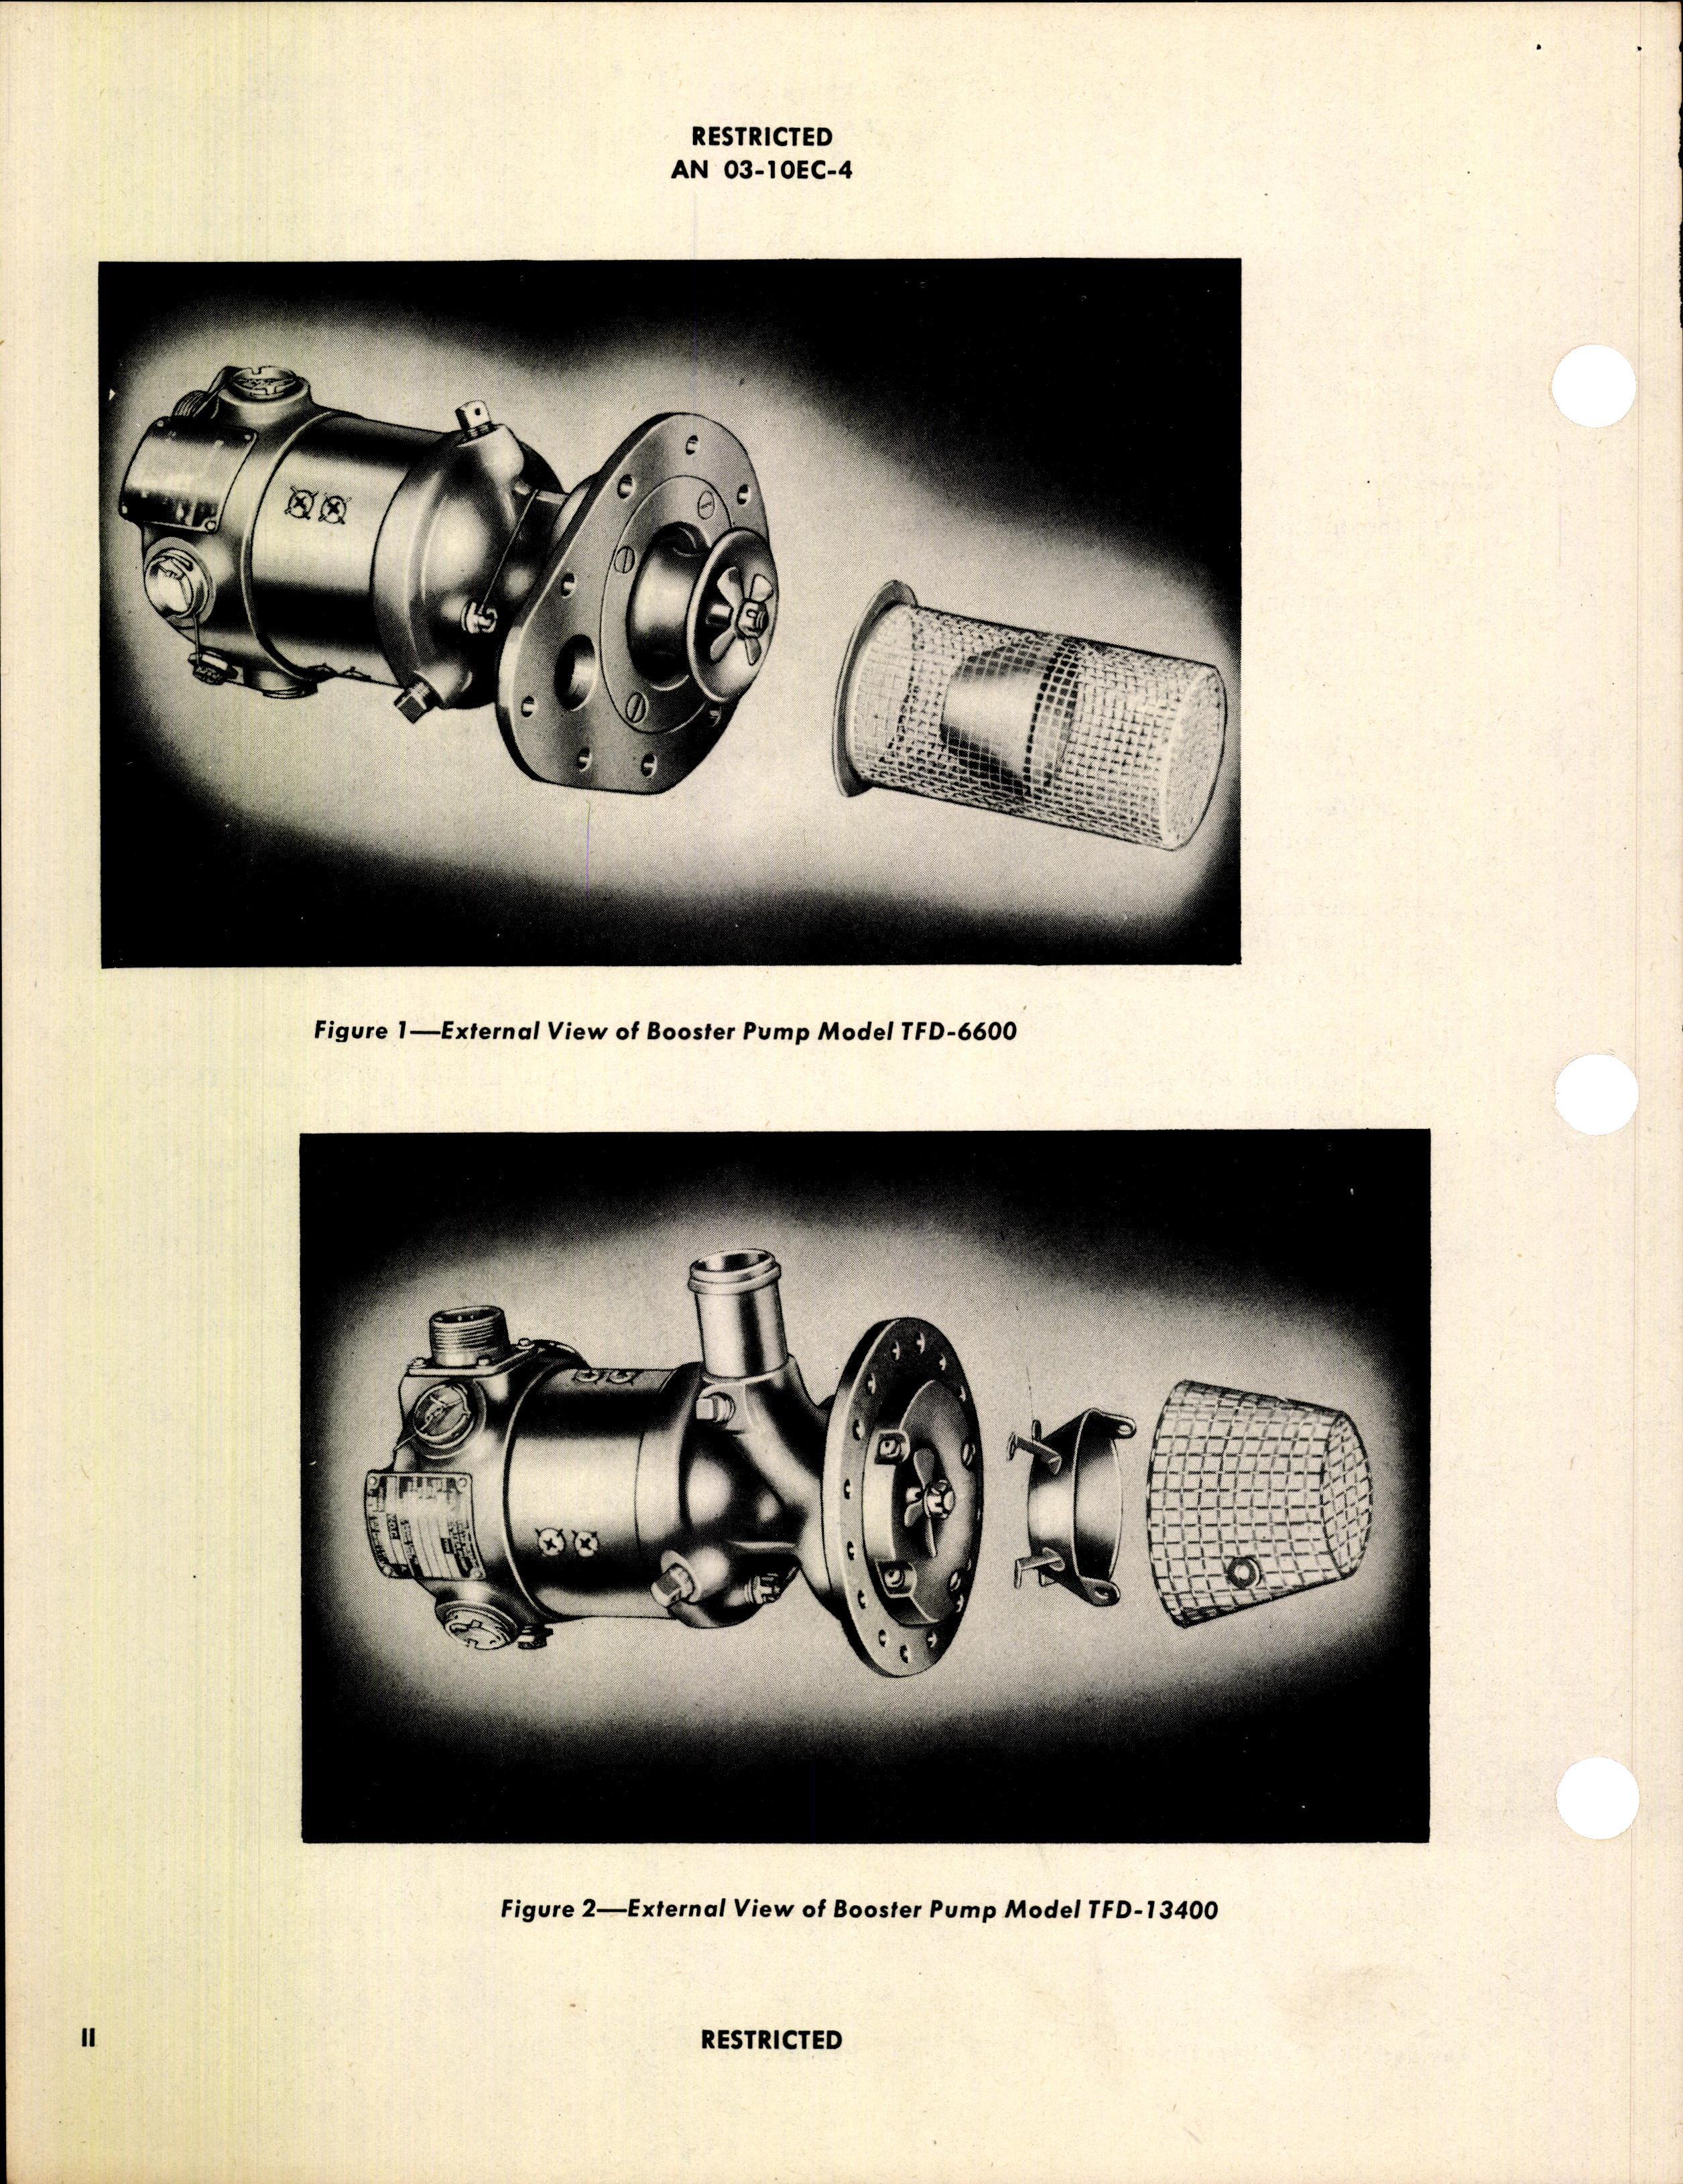 Sample page 4 from AirCorps Library document: Operation, Service, & Overhaul Instructions with Parts Catalog for Thompson Fuel Booster Pumps